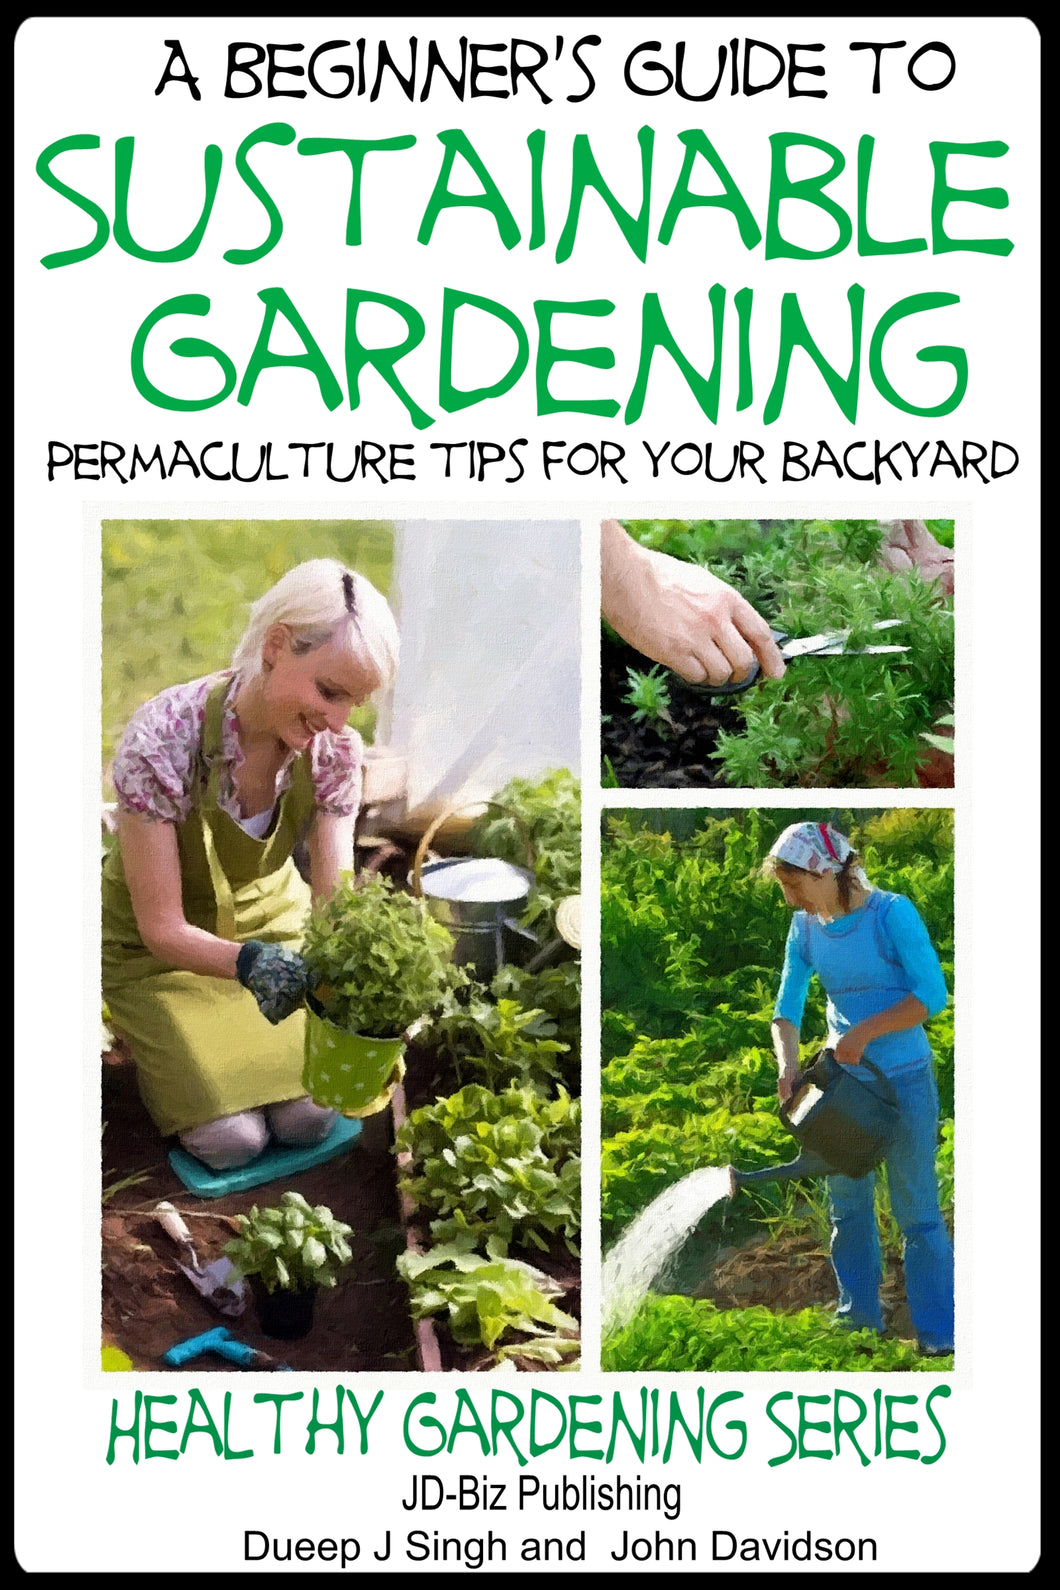 A Beginner’s Guide to Sustainable Gardening